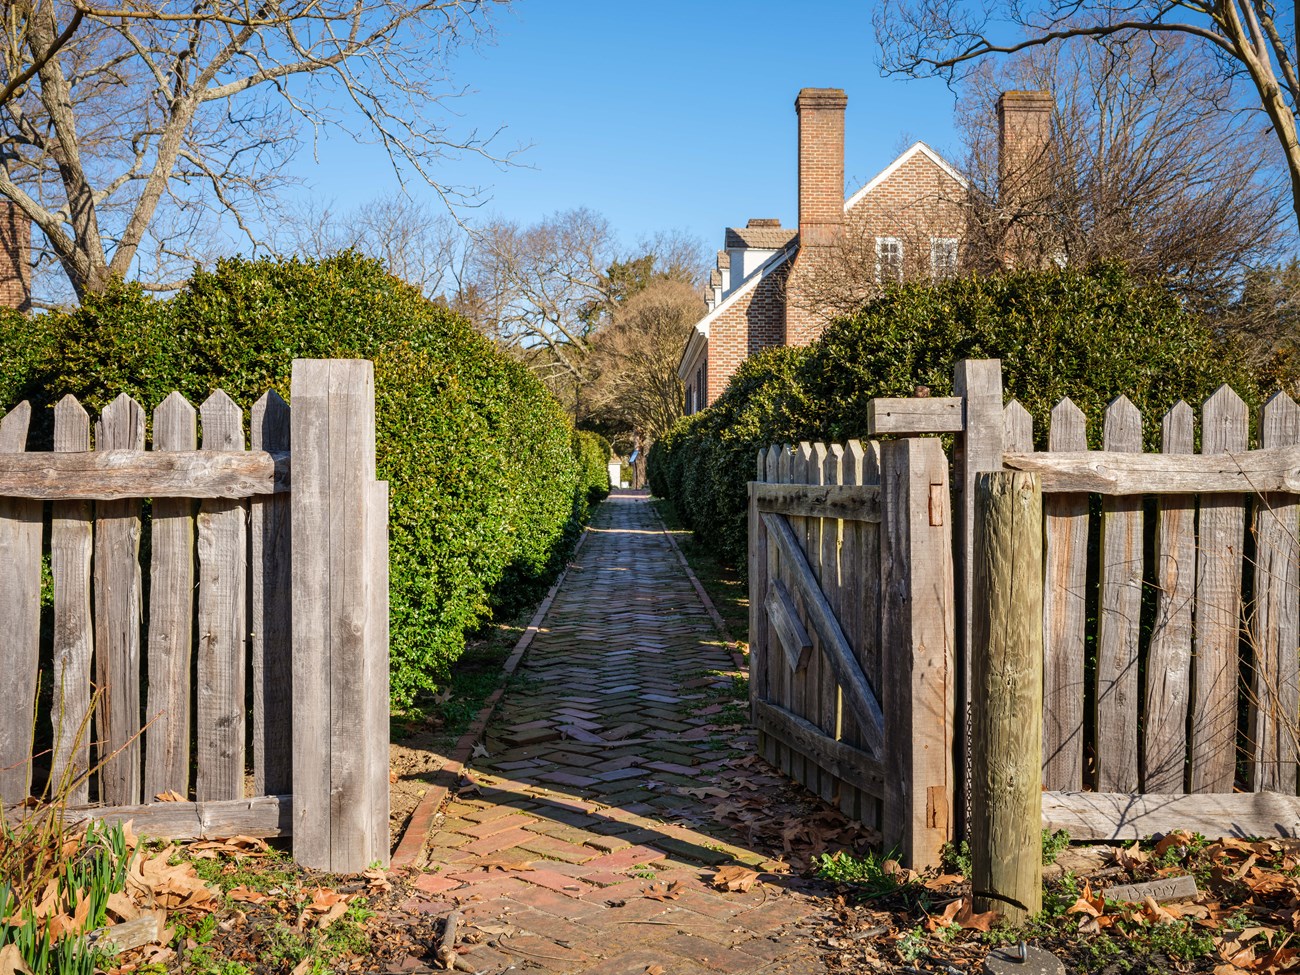 Colonial Revival Garden Gate and brick path